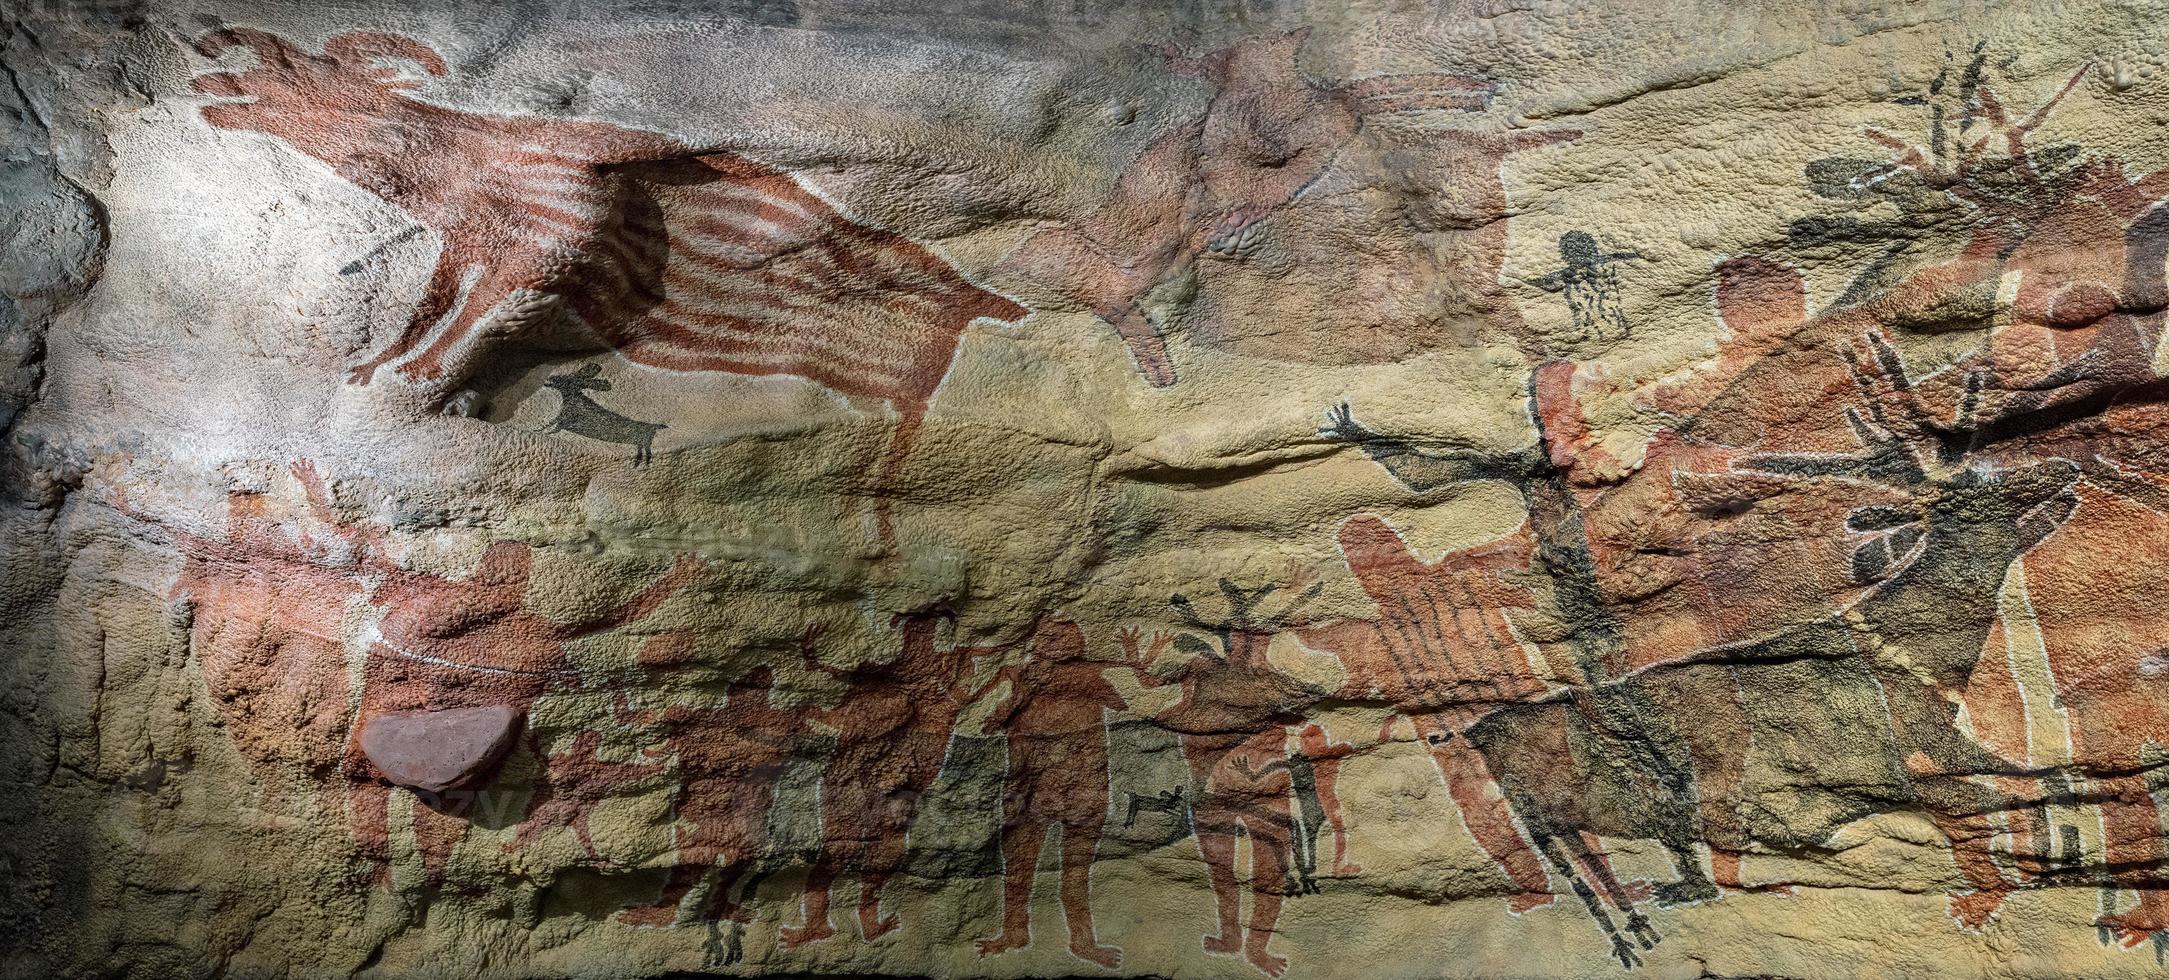 petroglyph cave painting reproduction in Mexico photo